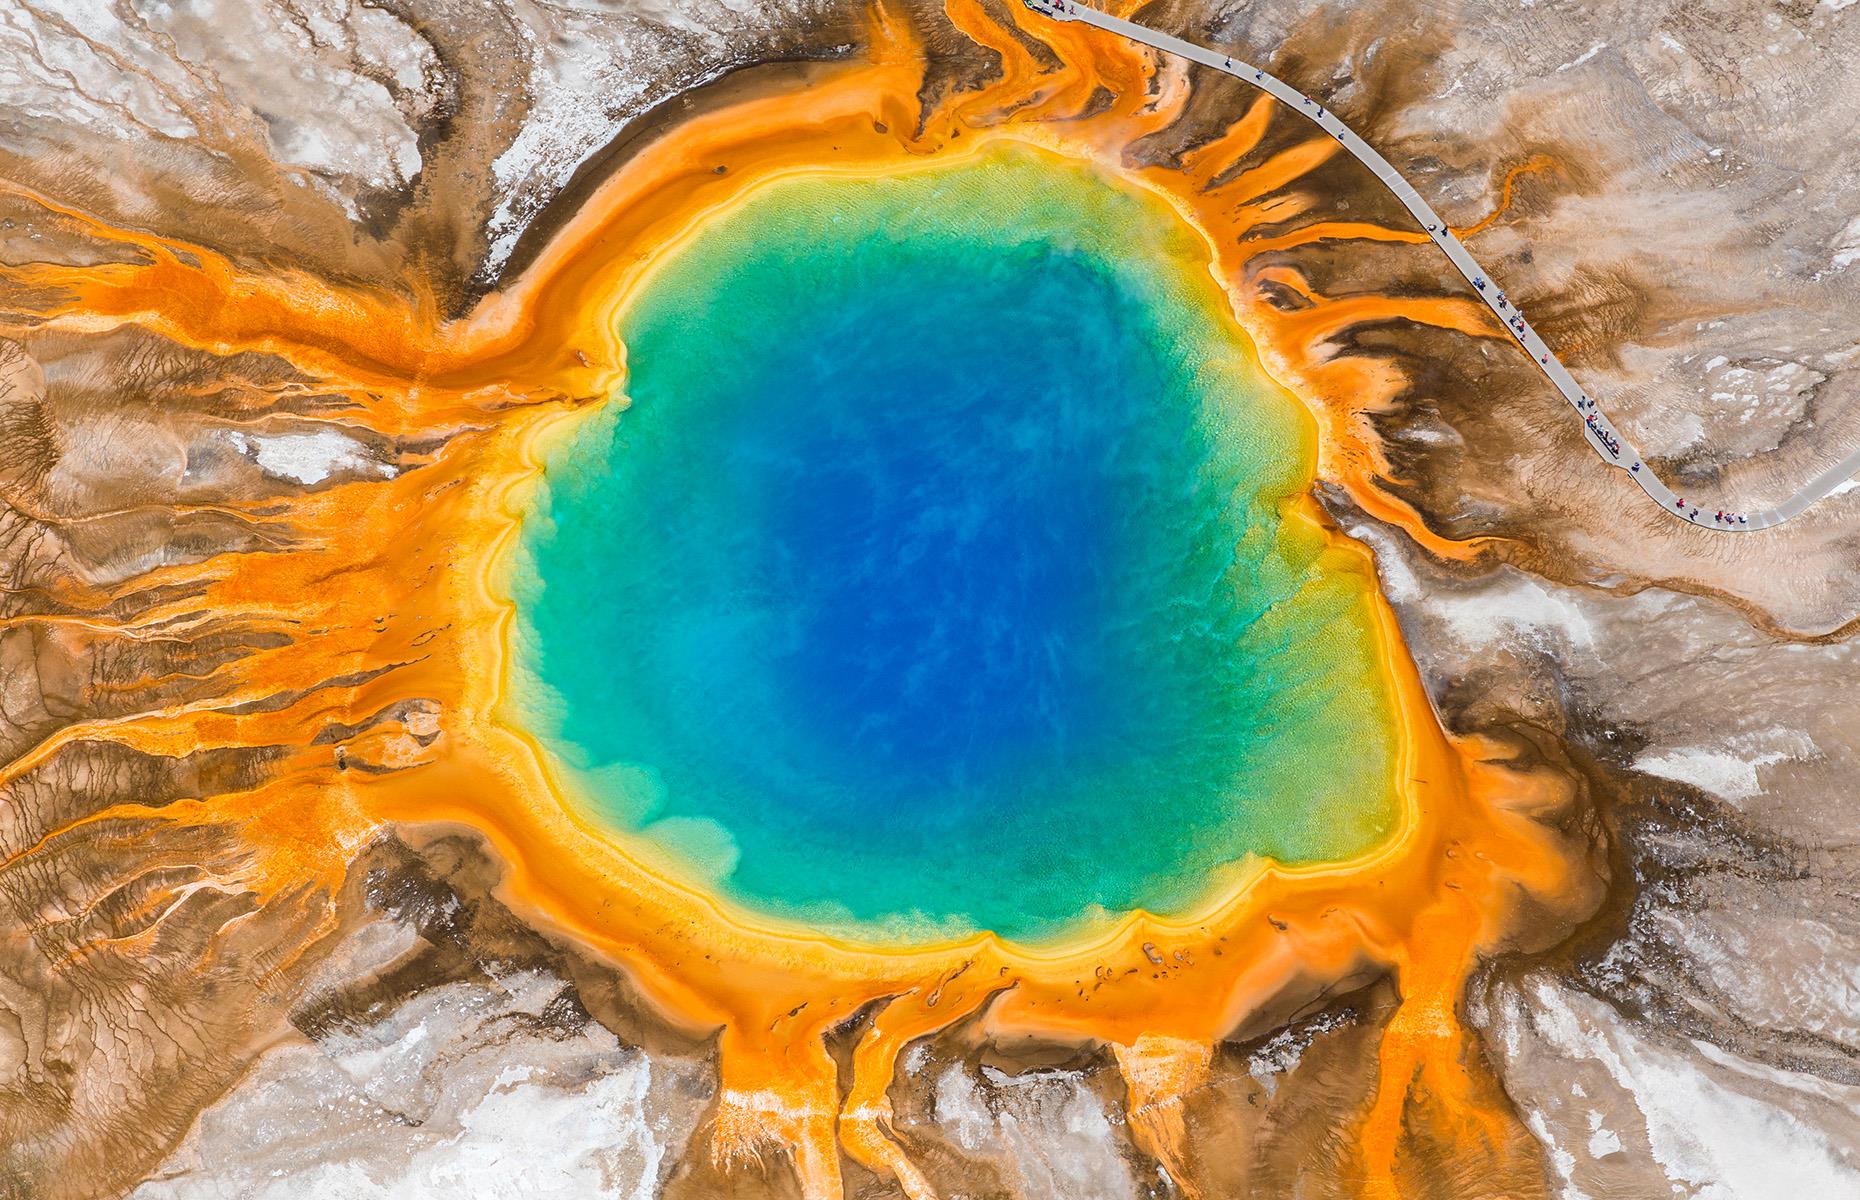 <p>It was in 1872 that <a href="https://www.loveexploring.com/news/76305/of-bison-and-bears-why-yellowstone-reminds-us-of-our-place-on-the-planet">Yellowstone</a> became the USA's first ever national park, set to be preserved for its hydrothermal features and intriguing geological formations. It's the Old Faithful geysir that gets most attention here, its boiling blue waters surrounded by iridescent yellow and orange bacterial deposits, but there's lots more to love. Take a bear watching trip, see the park's bolshy bison population, and stroll along a series of boardwalks that cross over the steaming Norris Geyser Basin. </p>